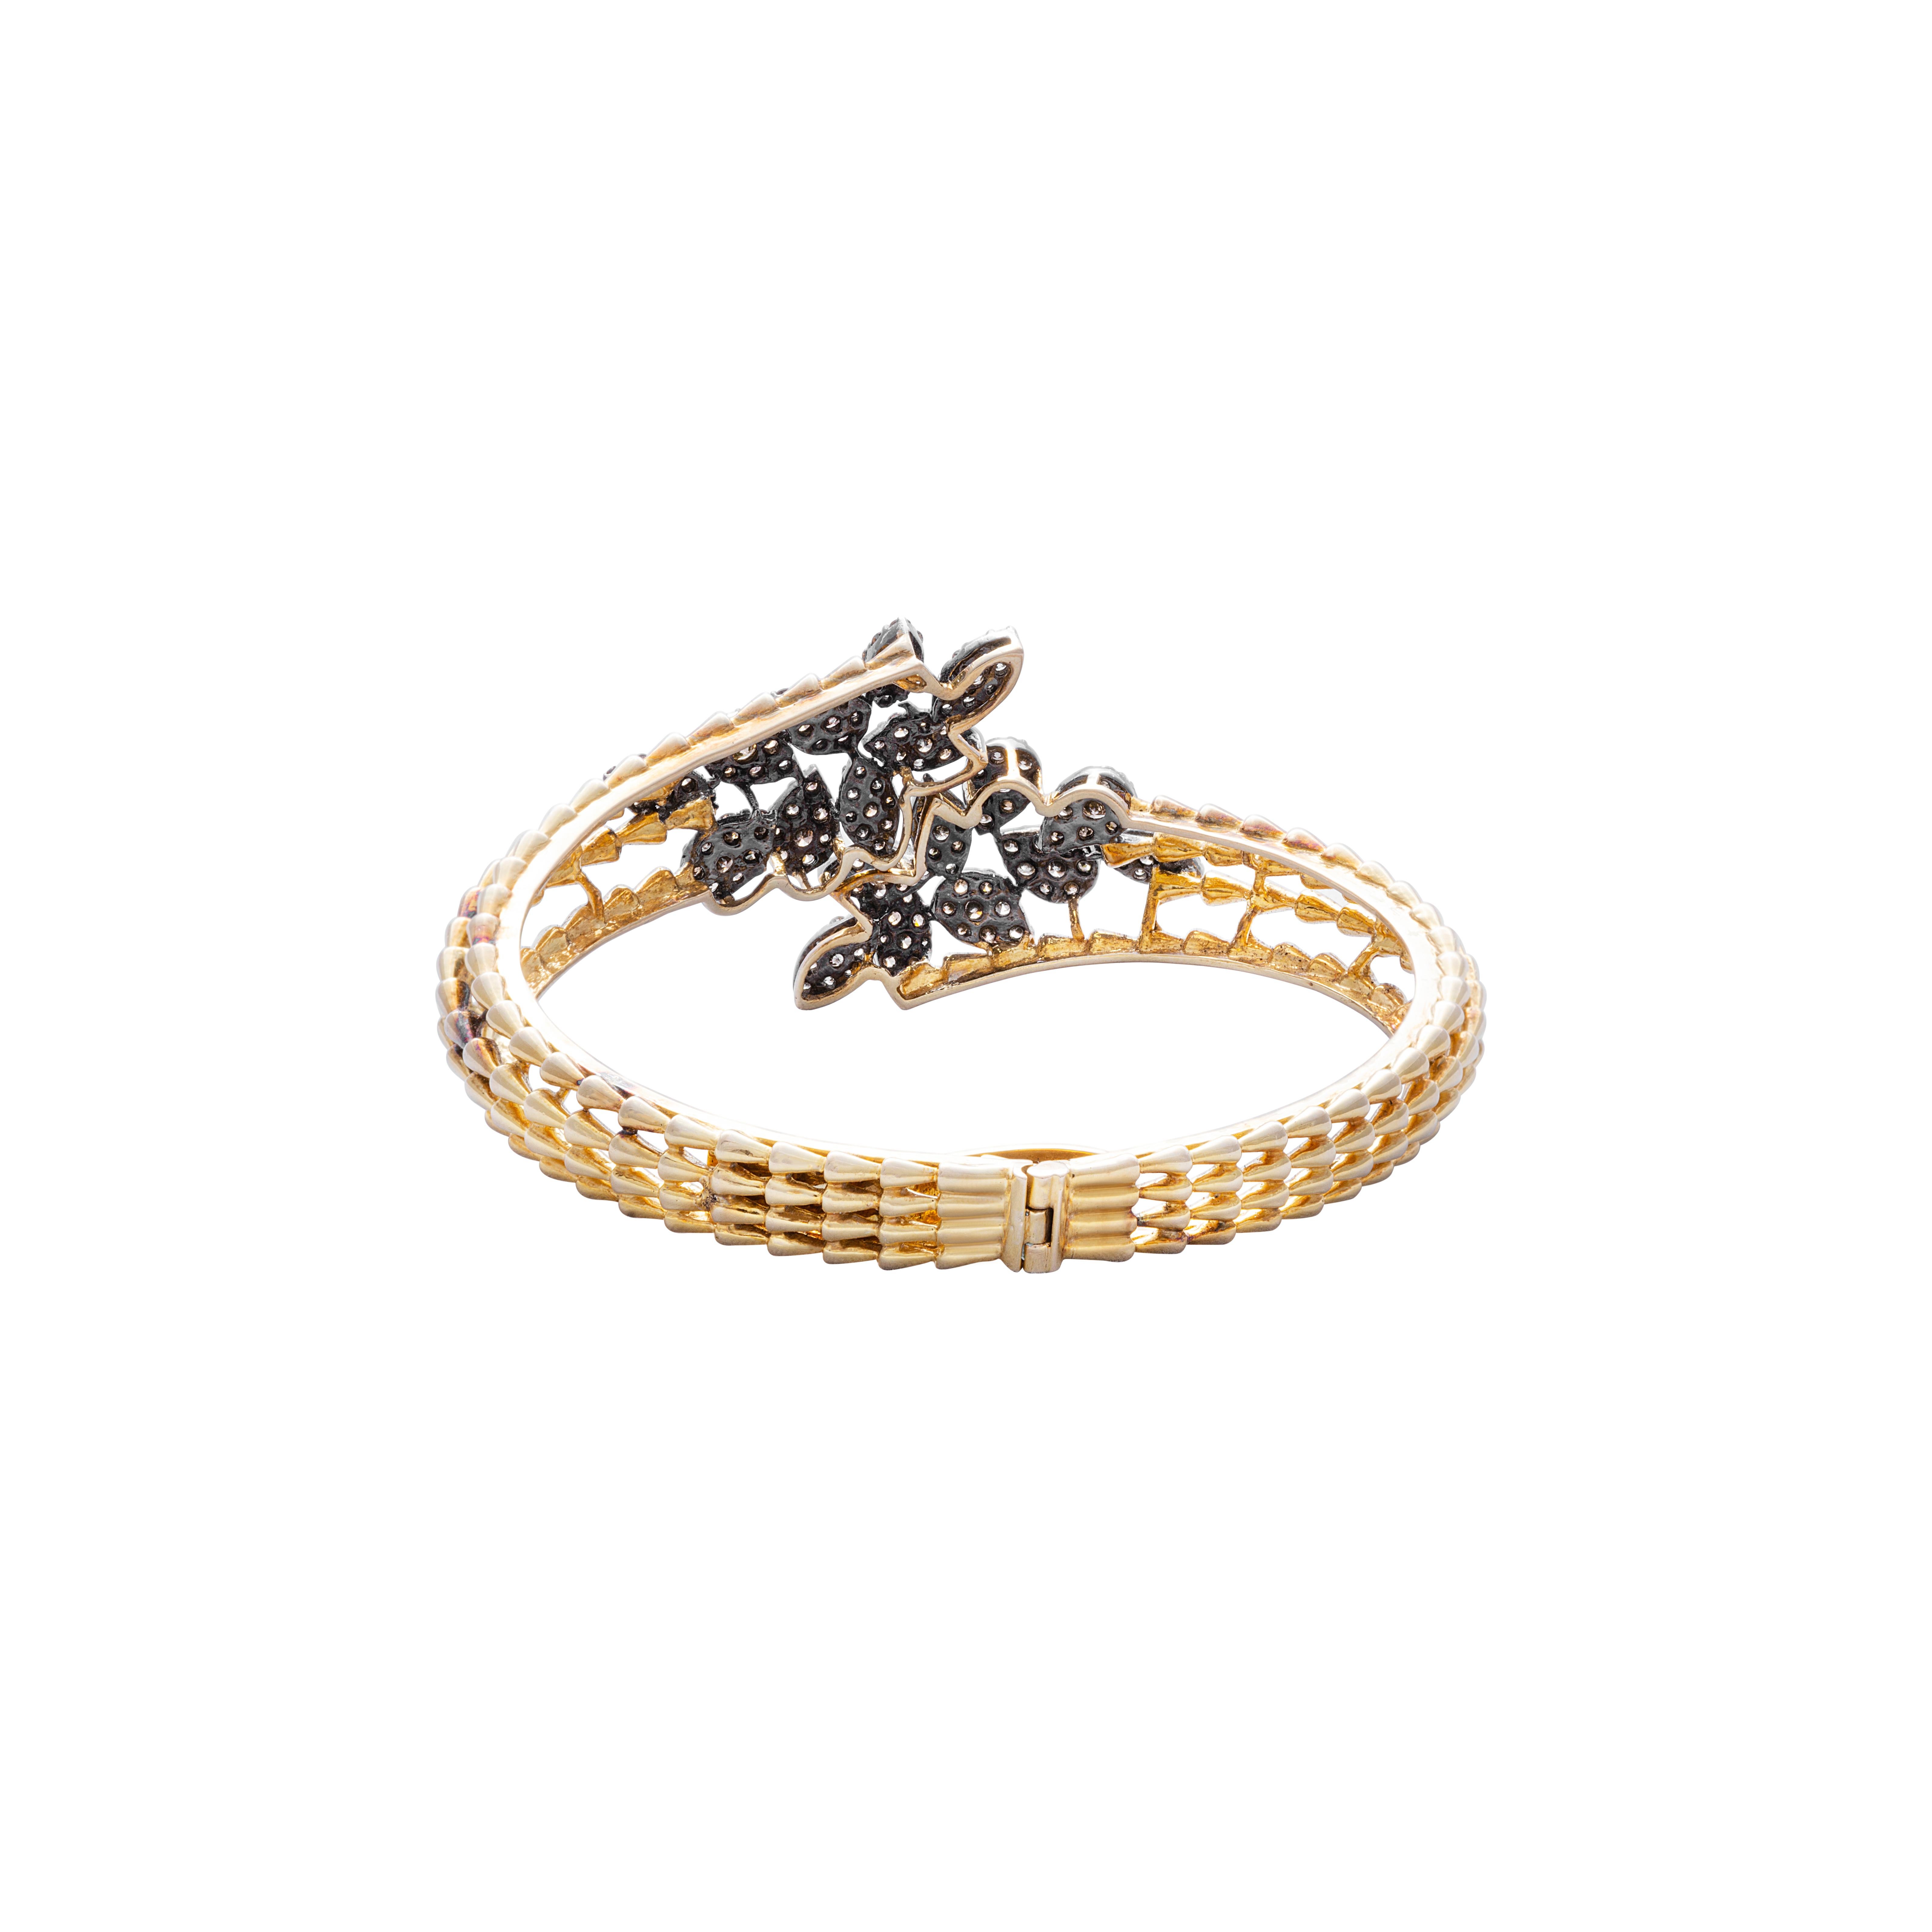 18 Karat Yellow Gold Brown Diamond Clamper Bracelet

A beautifully crafted bracelet studded with brown diamonds set in 18 Karat Yellow gold. A black rhodium polish is done to accentuate the brown diamonds and to add character to this bracelet. This